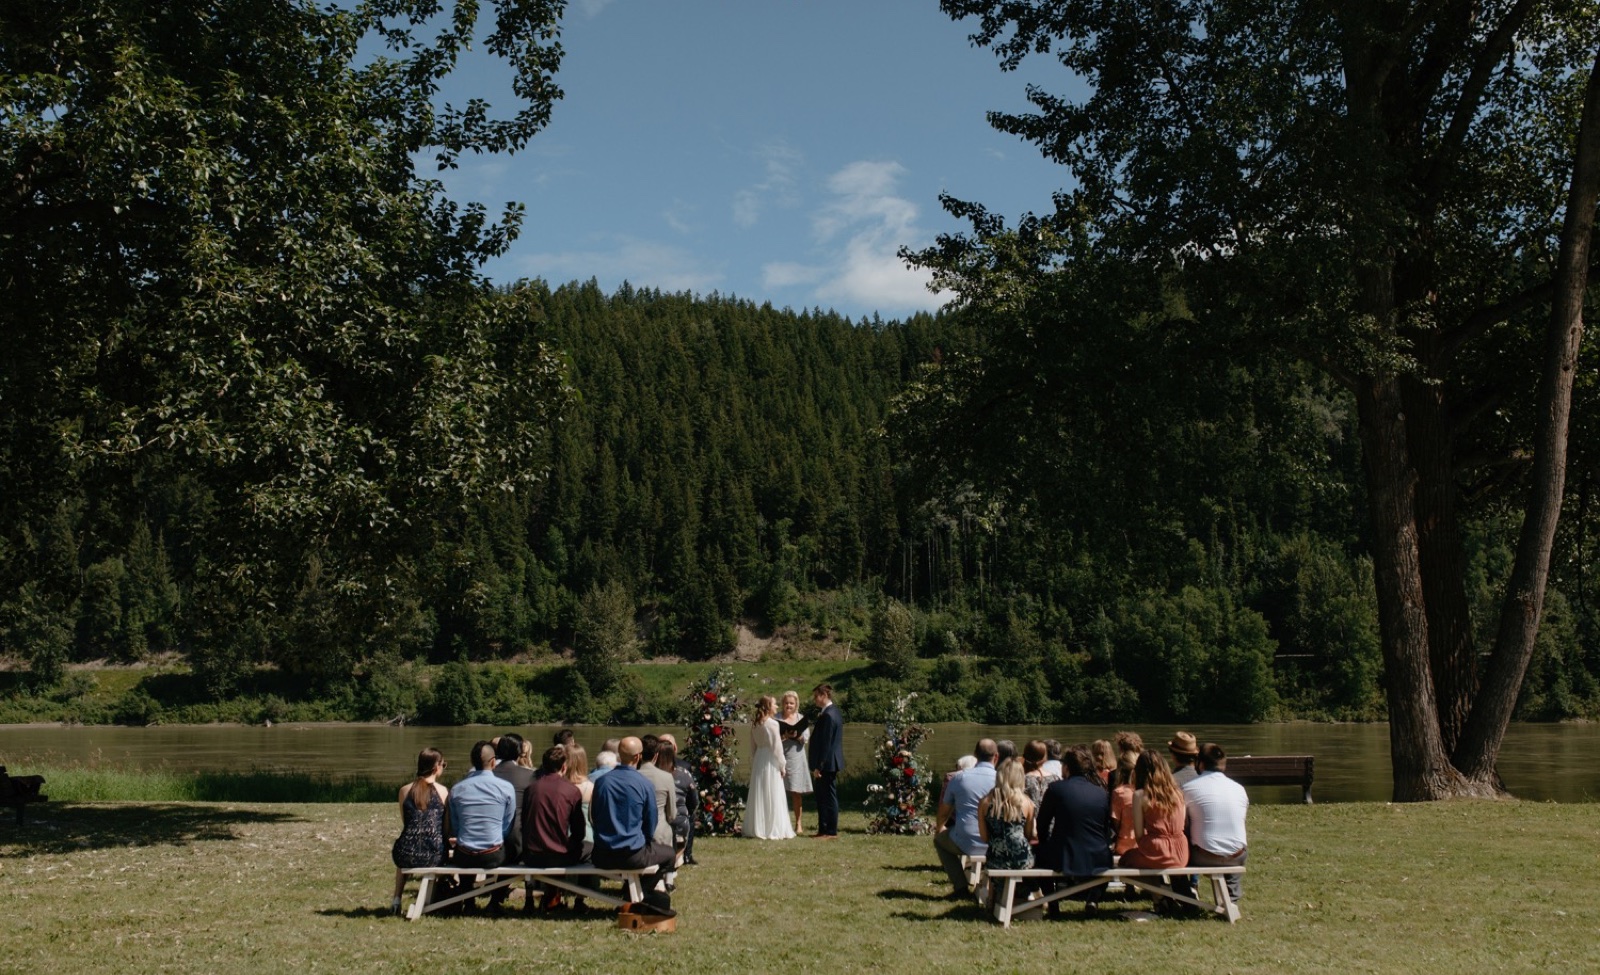 An intimate wedding ceremony overlooking the Fraser River in Paddlewheel Park, British Columbia